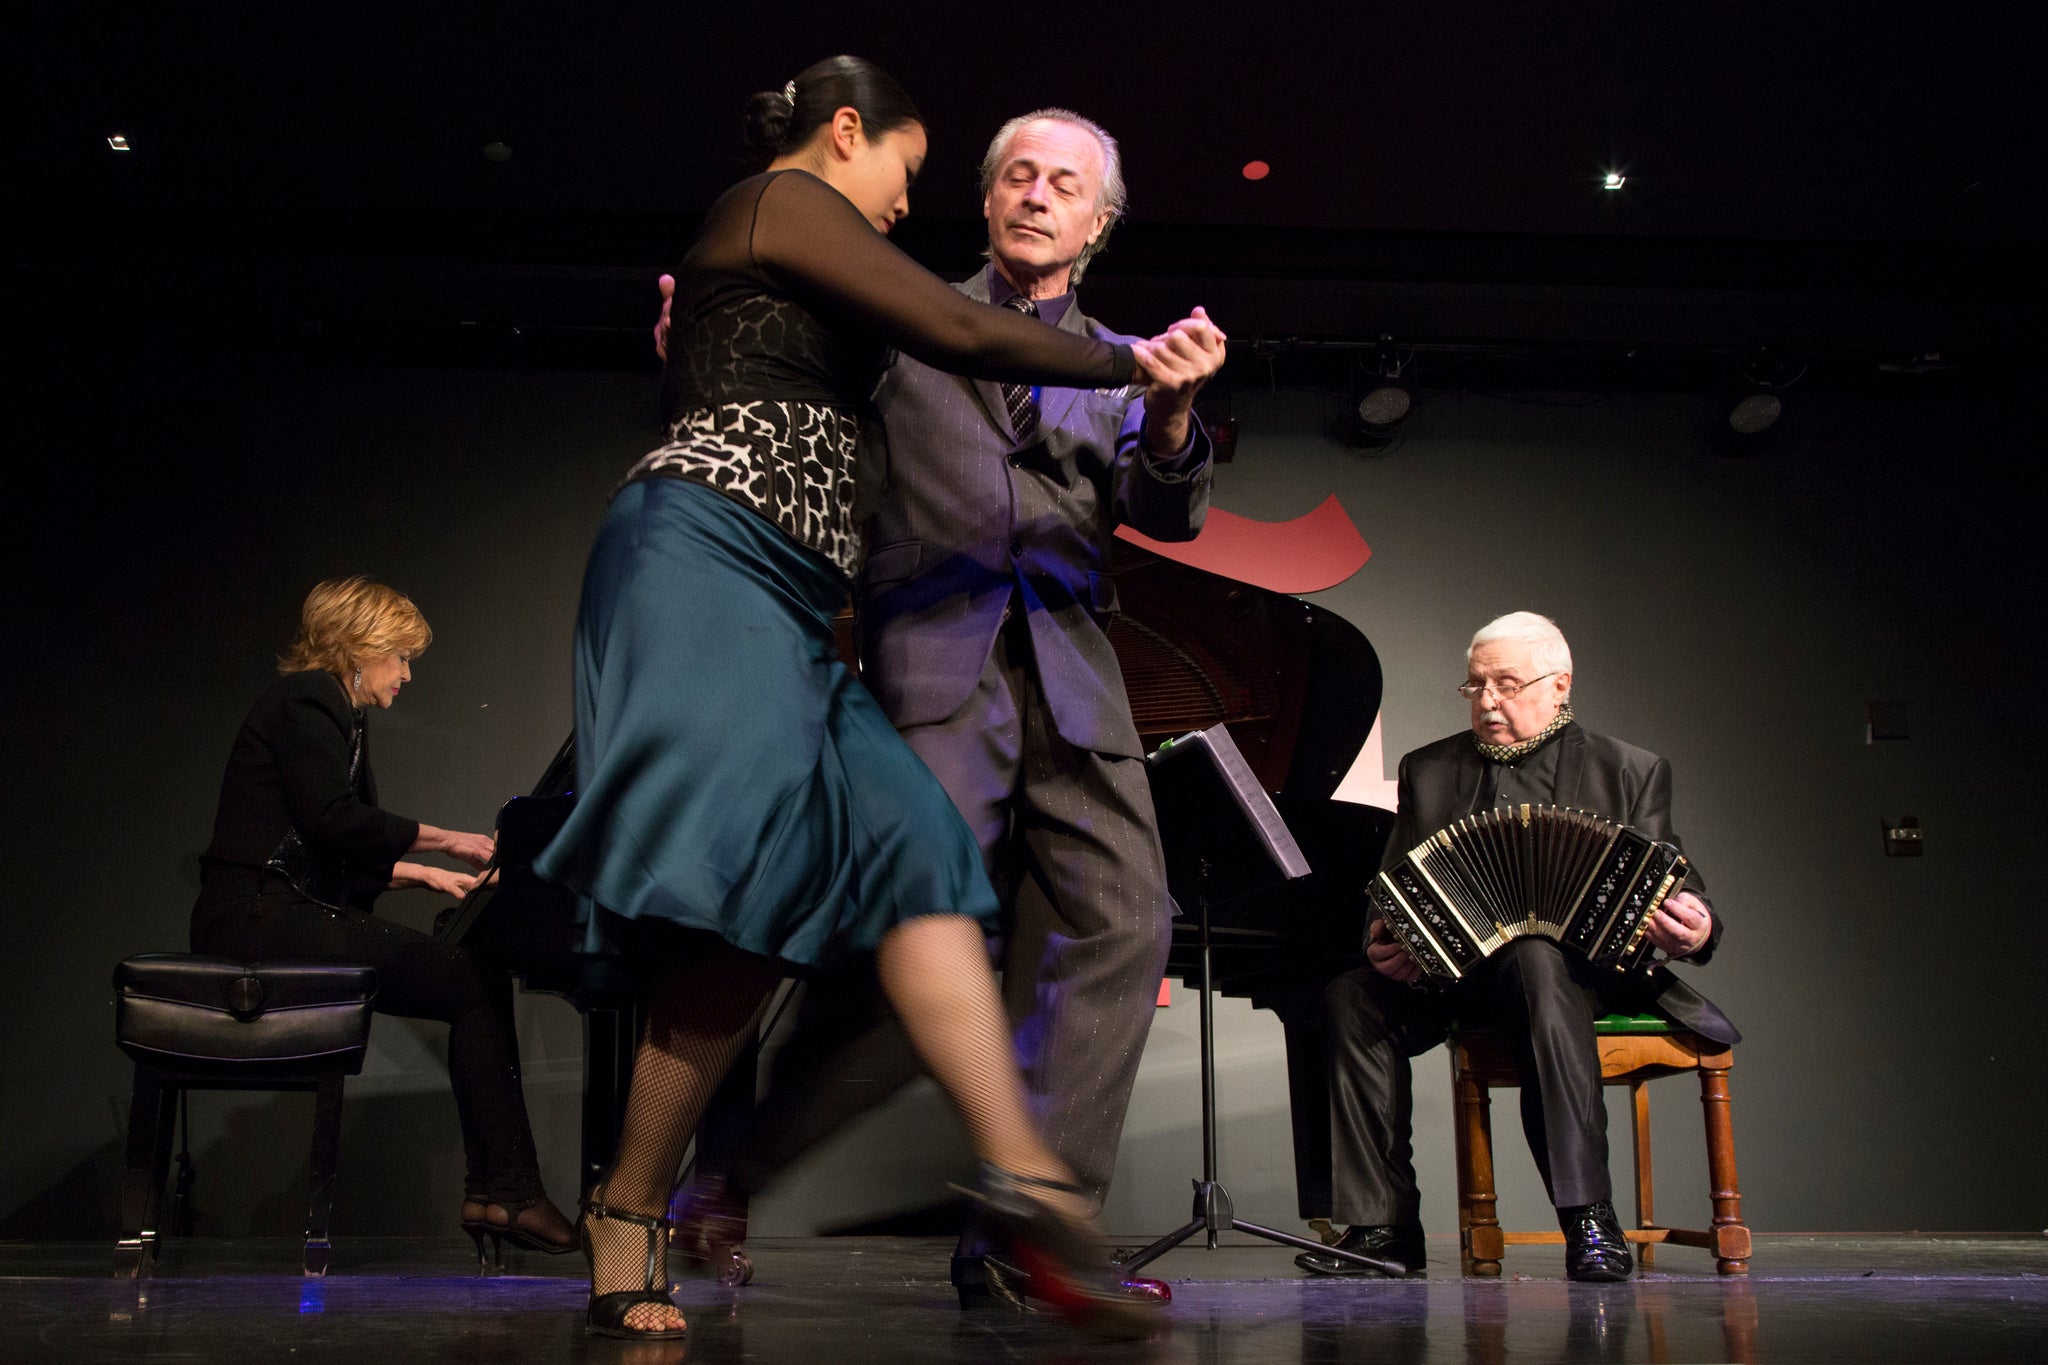 A Tango Show, Hosted by the International Latino Cultural Center of Chicago